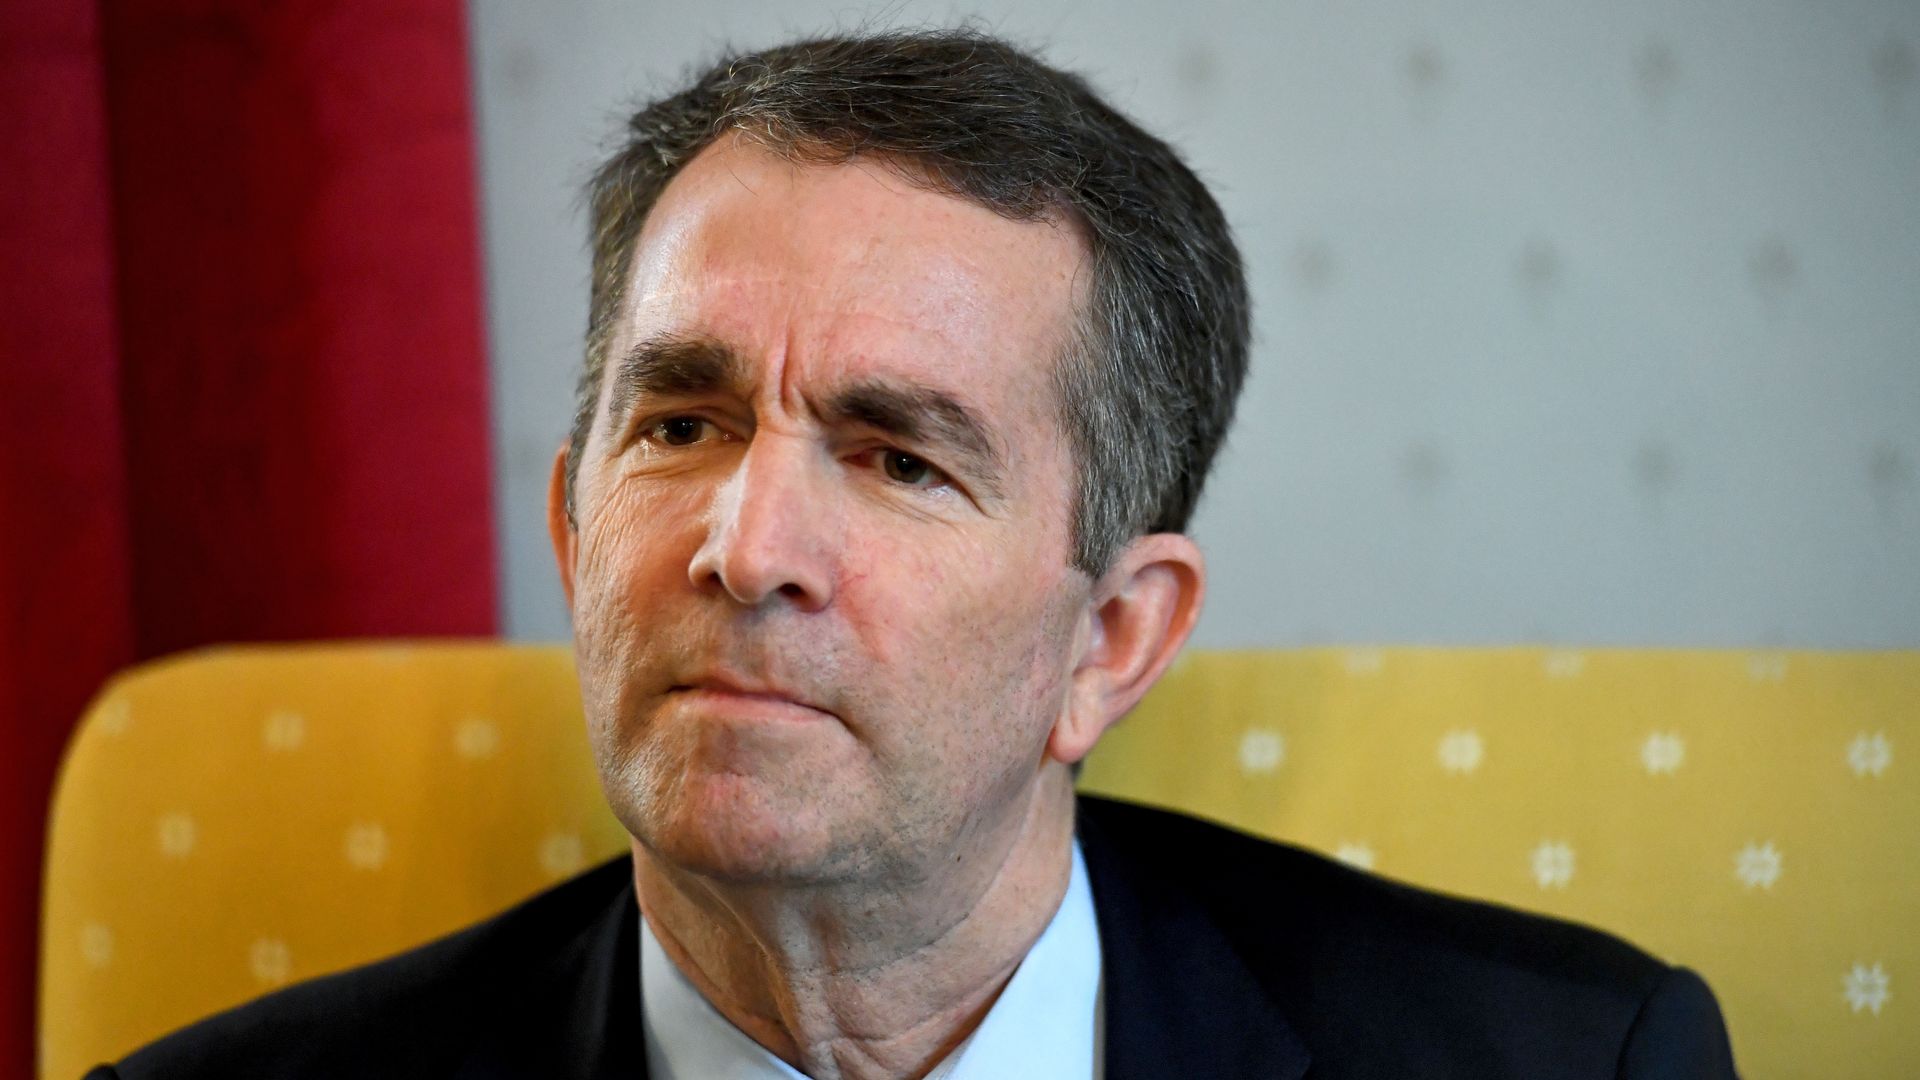 Virginia Gov. Ralph Northam talks about how he was raised during an interview in the Governor's Mansion February 09, 2019 in Richmond, VA. 